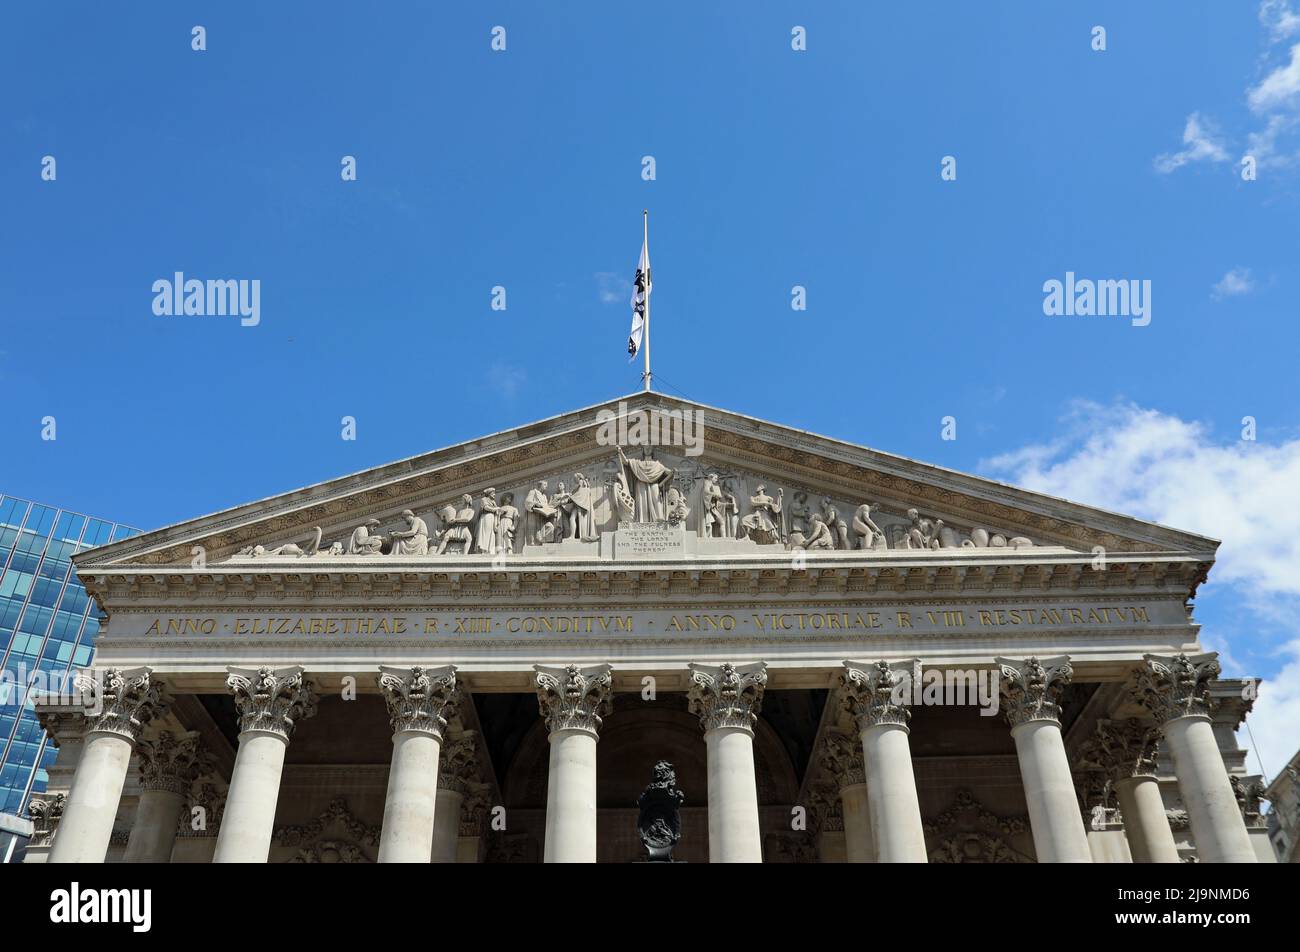 West facade of the Royal Exchange in the City of London Stock Photo